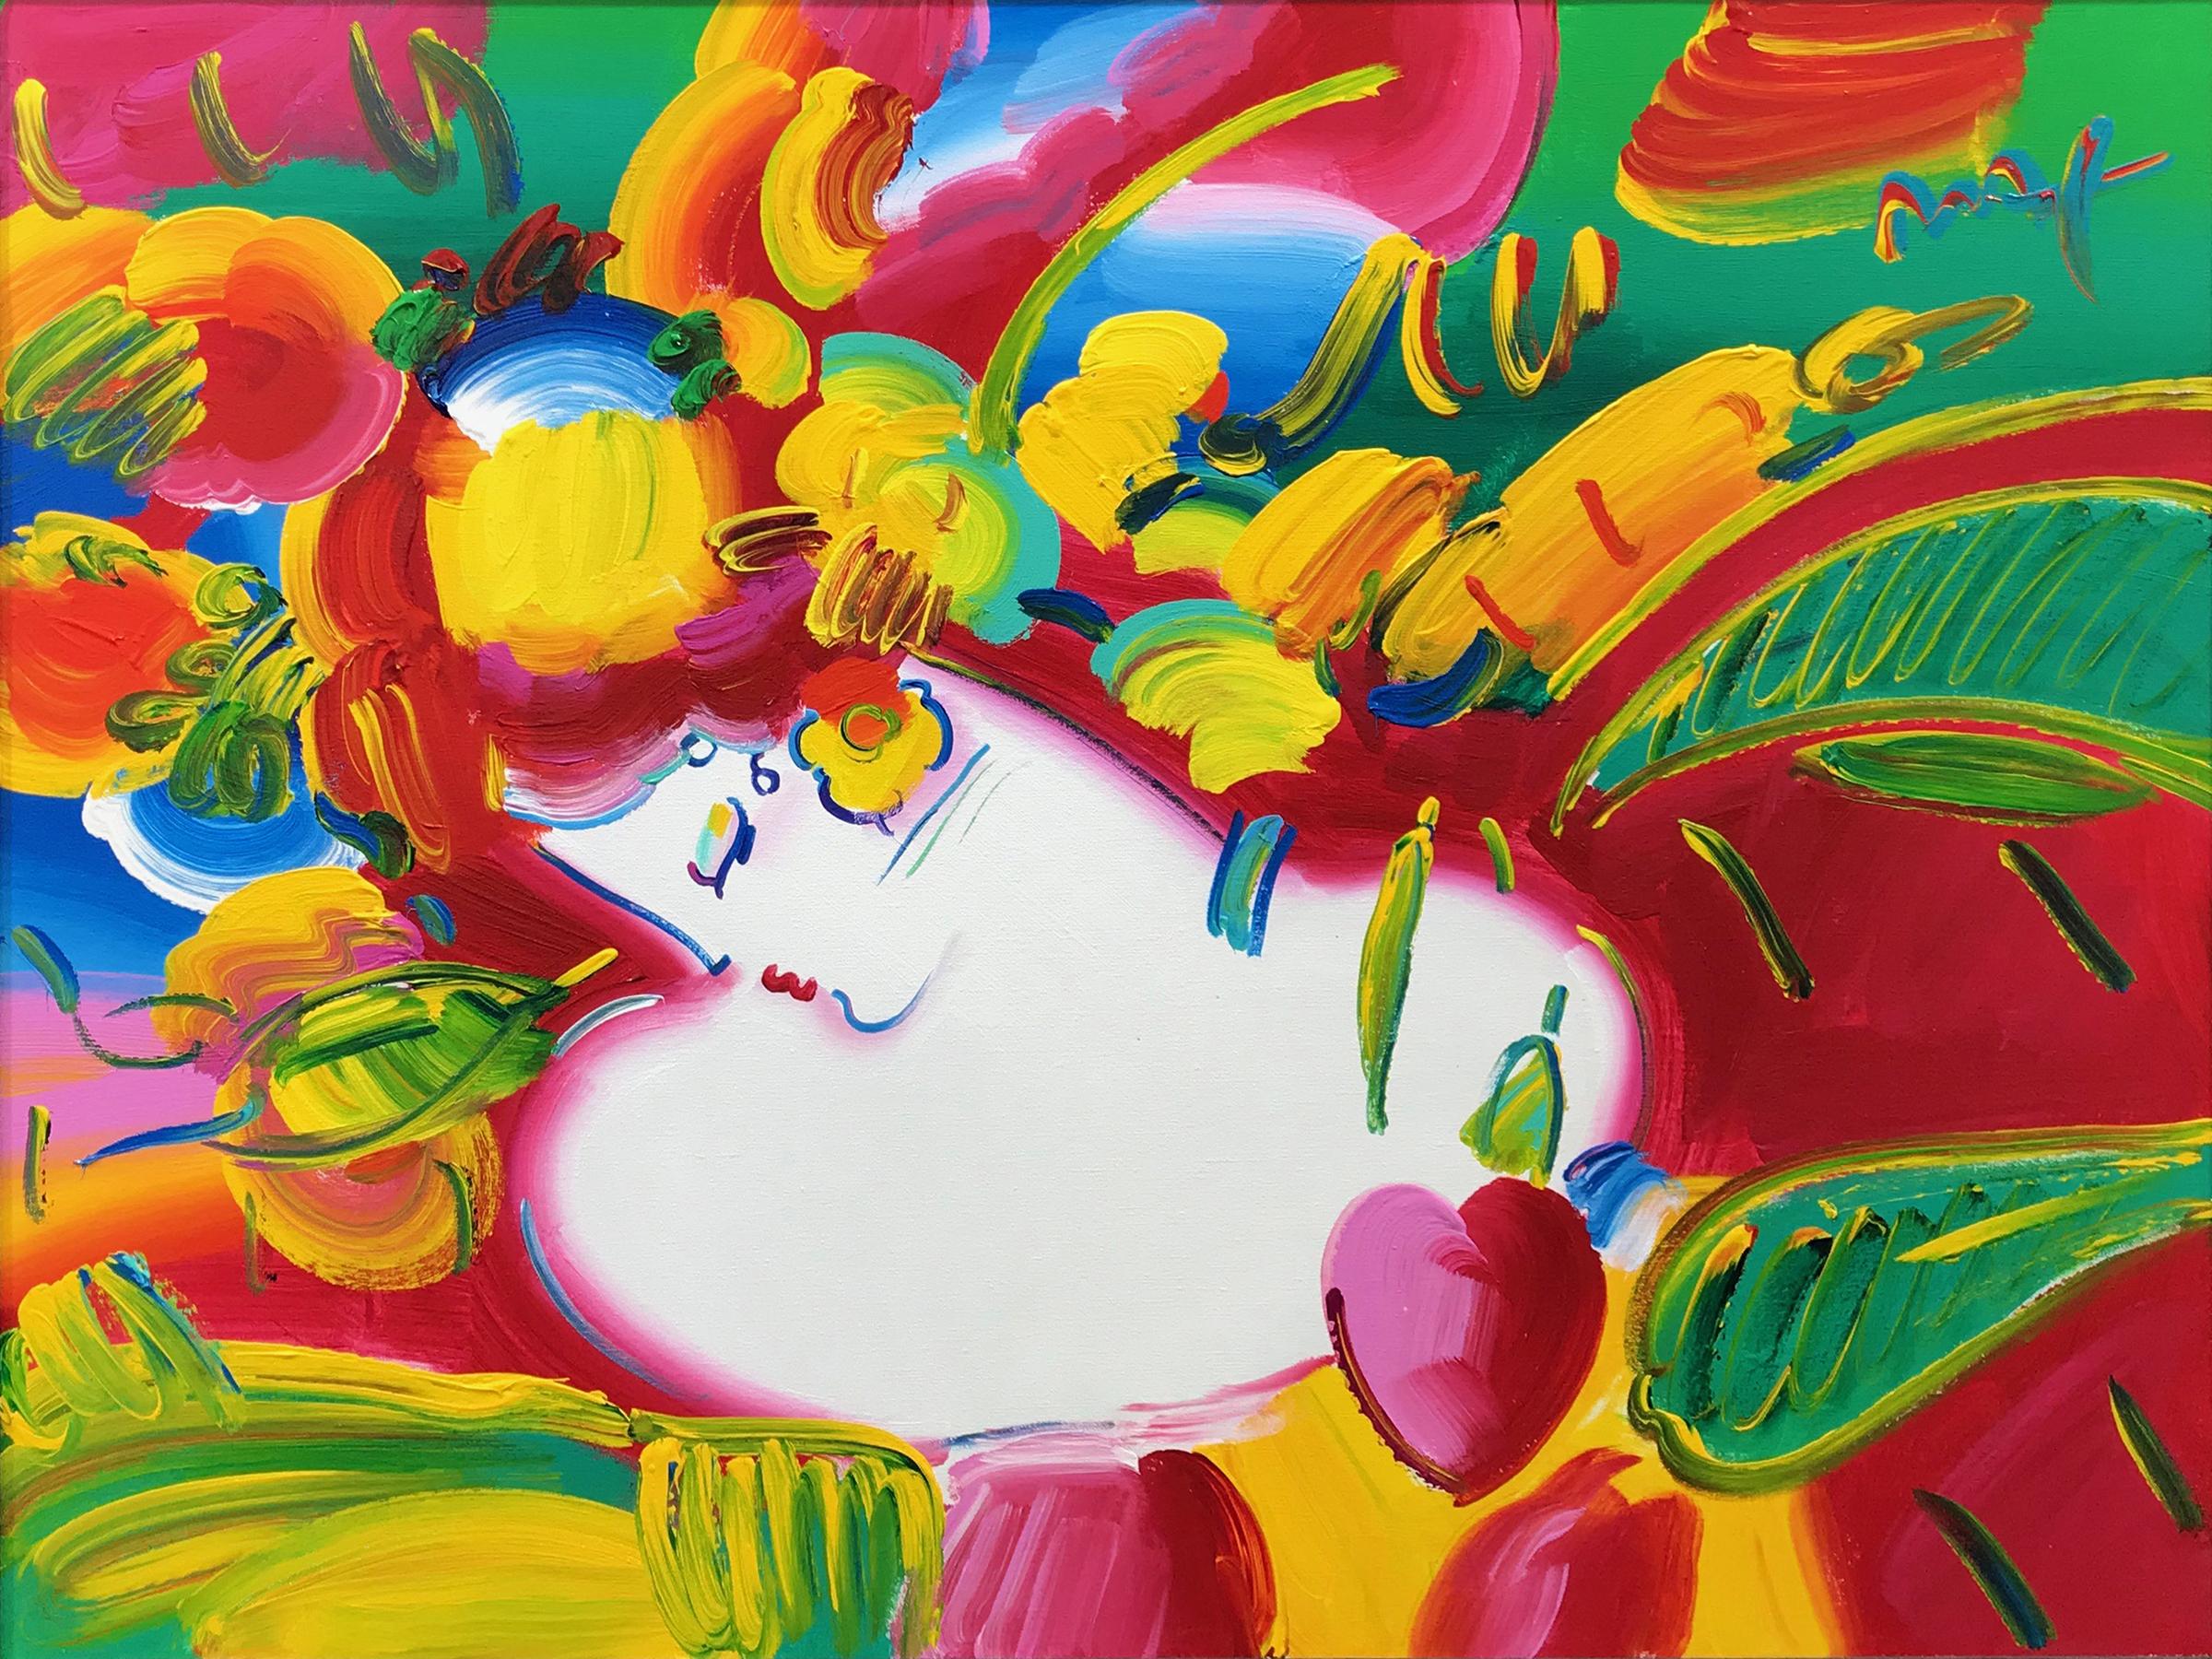 FLOWER BLOSSOM LADY - Painting by Peter Max